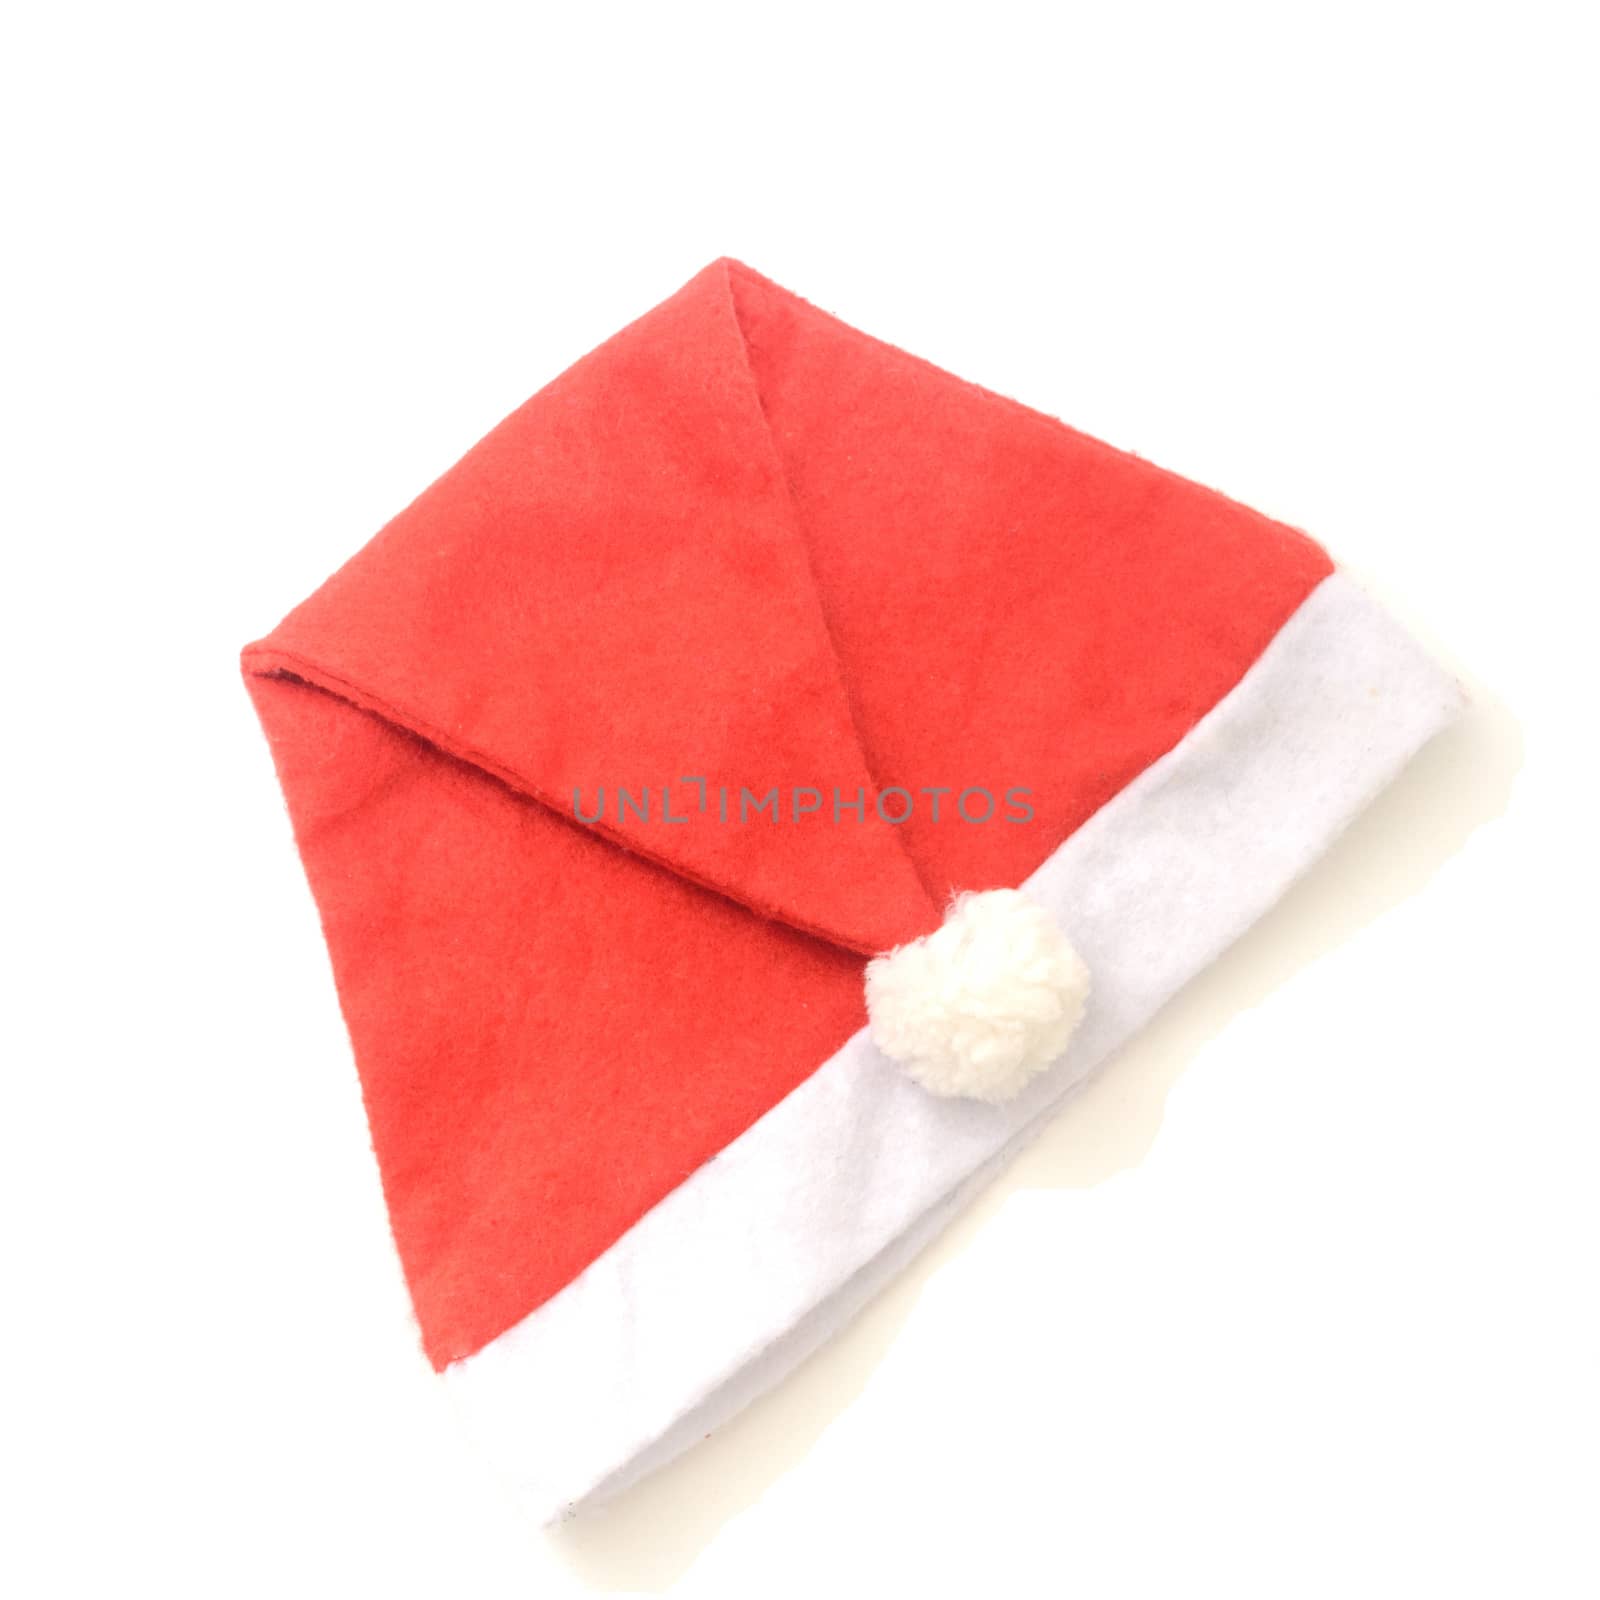 Santa Claus hat isolated on white background.Flat lay view